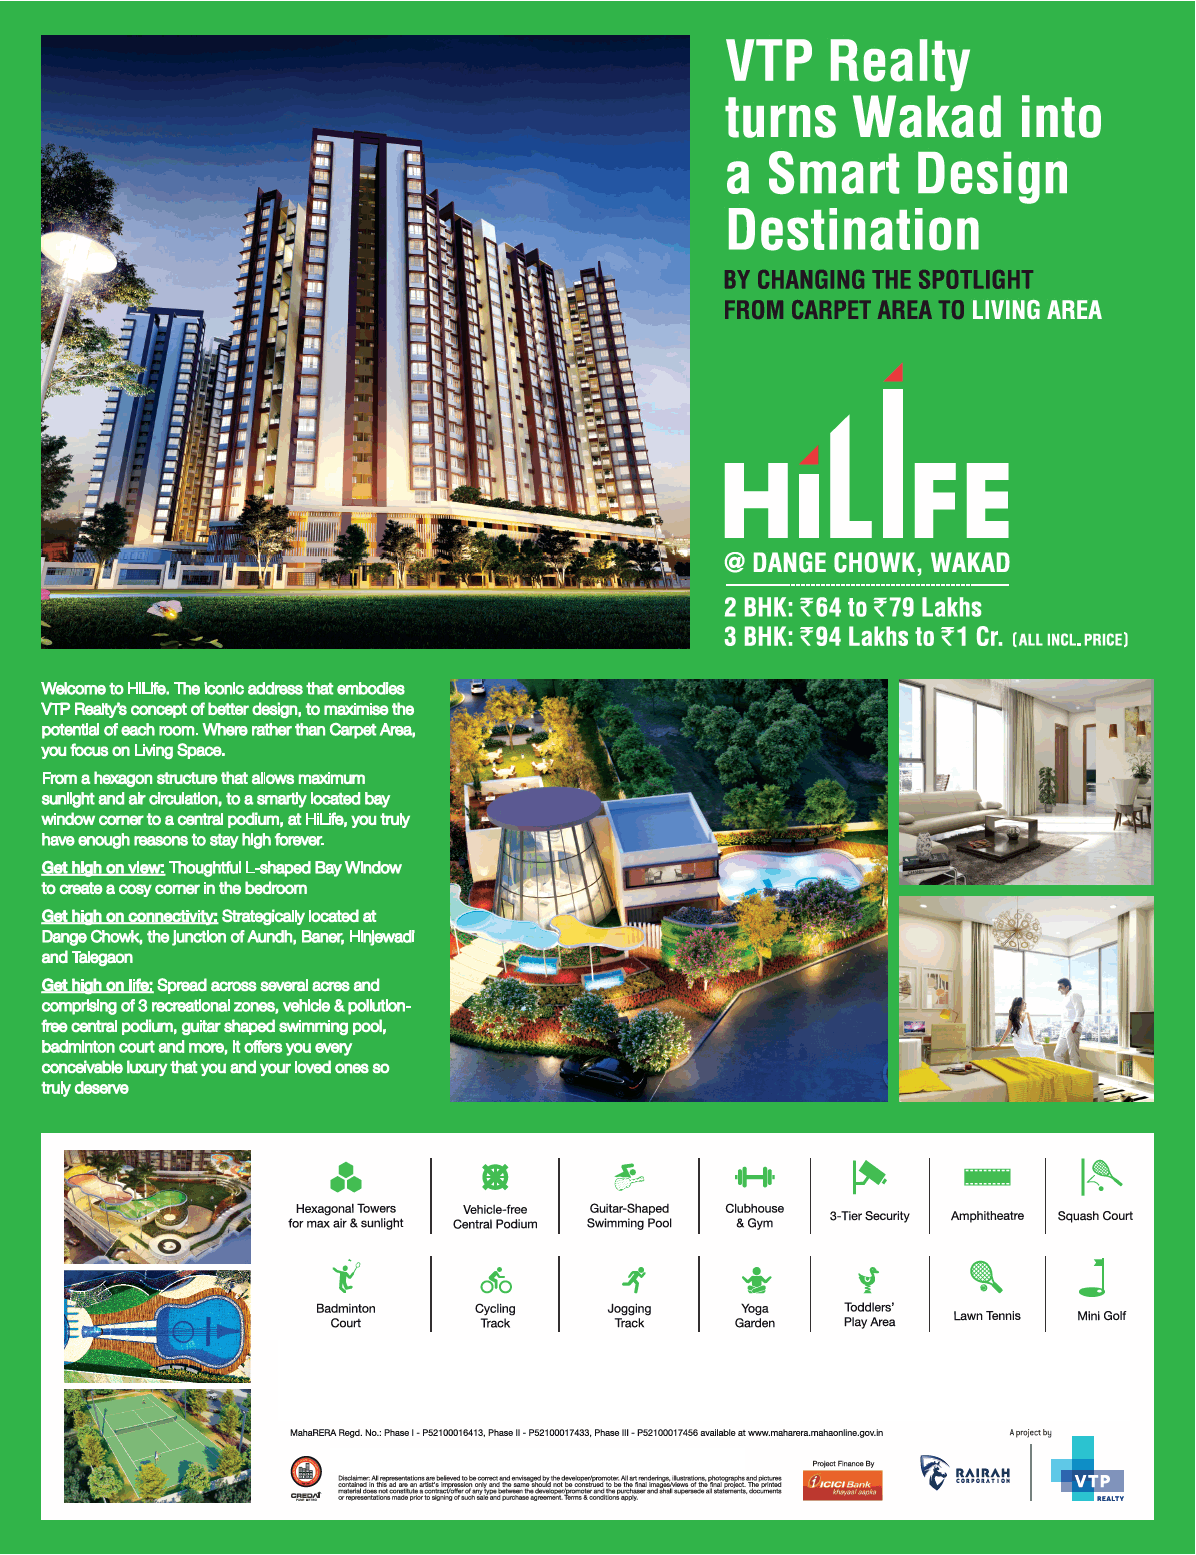 Book 2 & bhk with world class amenities at VTP Realty HiLife in Pune